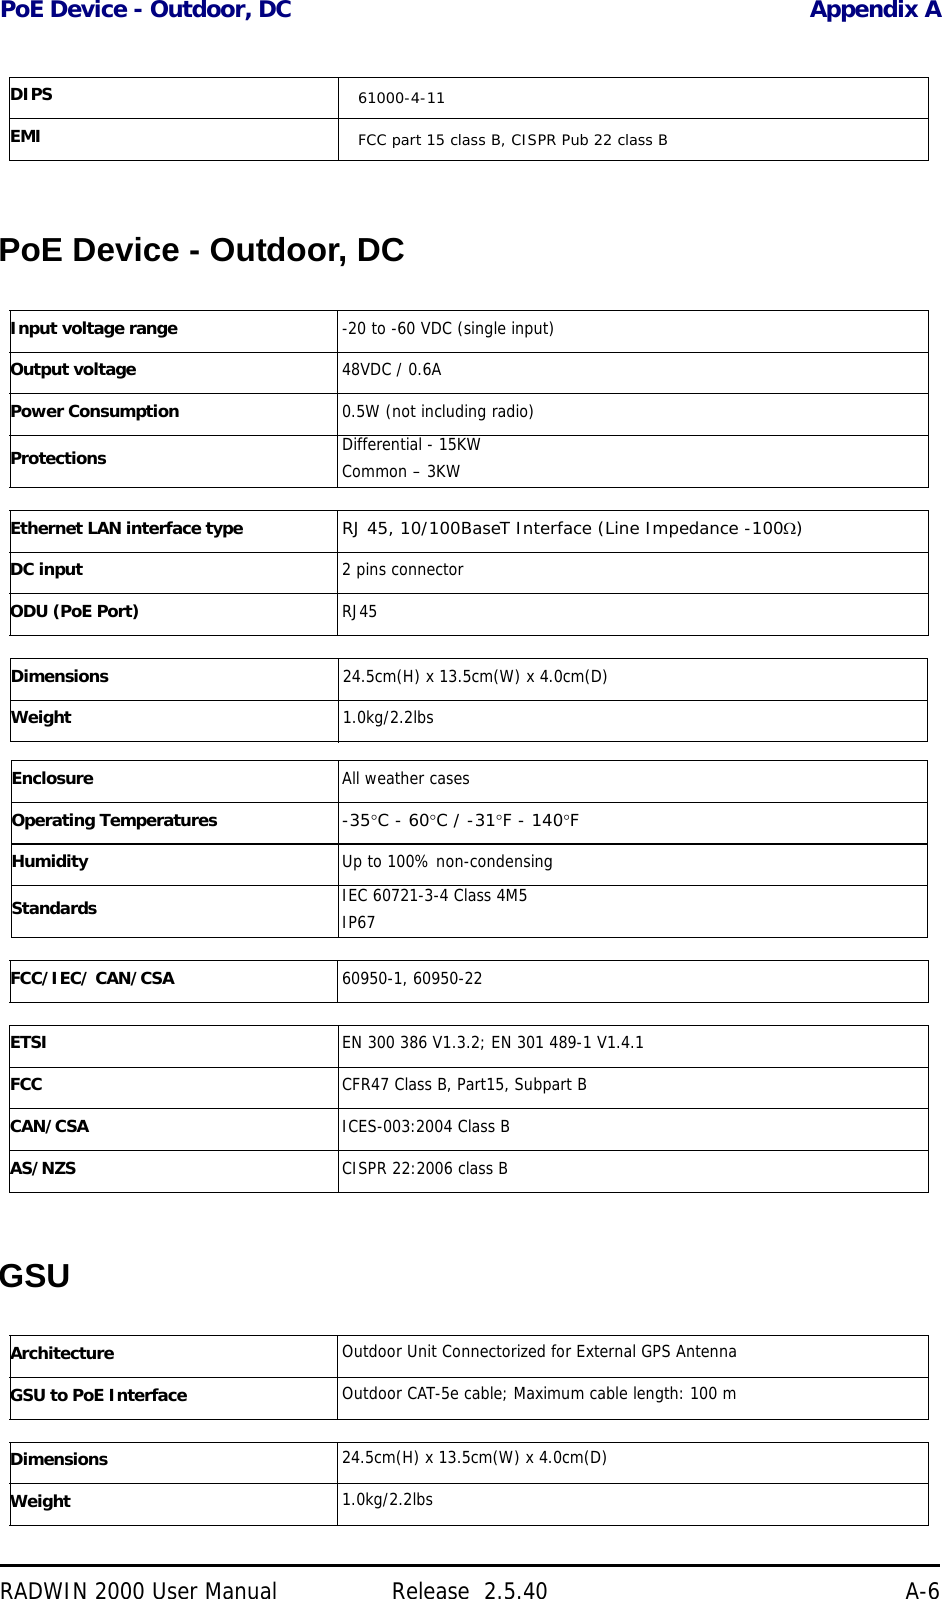 PoE Device - Outdoor, DC Appendix ARADWIN 2000 User Manual Release  2.5.40 A-6PoE Device - Outdoor, DCGSUDIPS 61000-4-11EMI FCC part 15 class B, CISPR Pub 22 class BInput voltage range -20 to -60 VDC (single input)Output voltage  48VDC / 0.6APower Consumption 0.5W (not including radio)Protections Differential - 15KWCommon – 3KWEthernet LAN interface type RJ 45, 10/100BaseT Interface (Line Impedance -100)DC input 2 pins connectorODU (PoE Port) RJ45 Dimensions 24.5cm(H) x 13.5cm(W) x 4.0cm(D)Weight 1.0kg/2.2lbsEnclosure All weather casesOperating Temperatures -35C - 60C / -31F - 140FHumidity Up to 100% non-condensingStandards IEC 60721-3-4 Class 4M5IP67FCC/IEC/ CAN/CSA 60950-1, 60950-22ETSI EN 300 386 V1.3.2; EN 301 489-1 V1.4.1FCC CFR47 Class B, Part15, Subpart BCAN/CSA ICES-003:2004 Class BAS/NZS CISPR 22:2006 class BArchitecture Outdoor Unit Connectorized for External GPS AntennaGSU to PoE Interface Outdoor CAT-5e cable; Maximum cable length: 100 mDimensions 24.5cm(H) x 13.5cm(W) x 4.0cm(D) Weight 1.0kg/2.2lbs